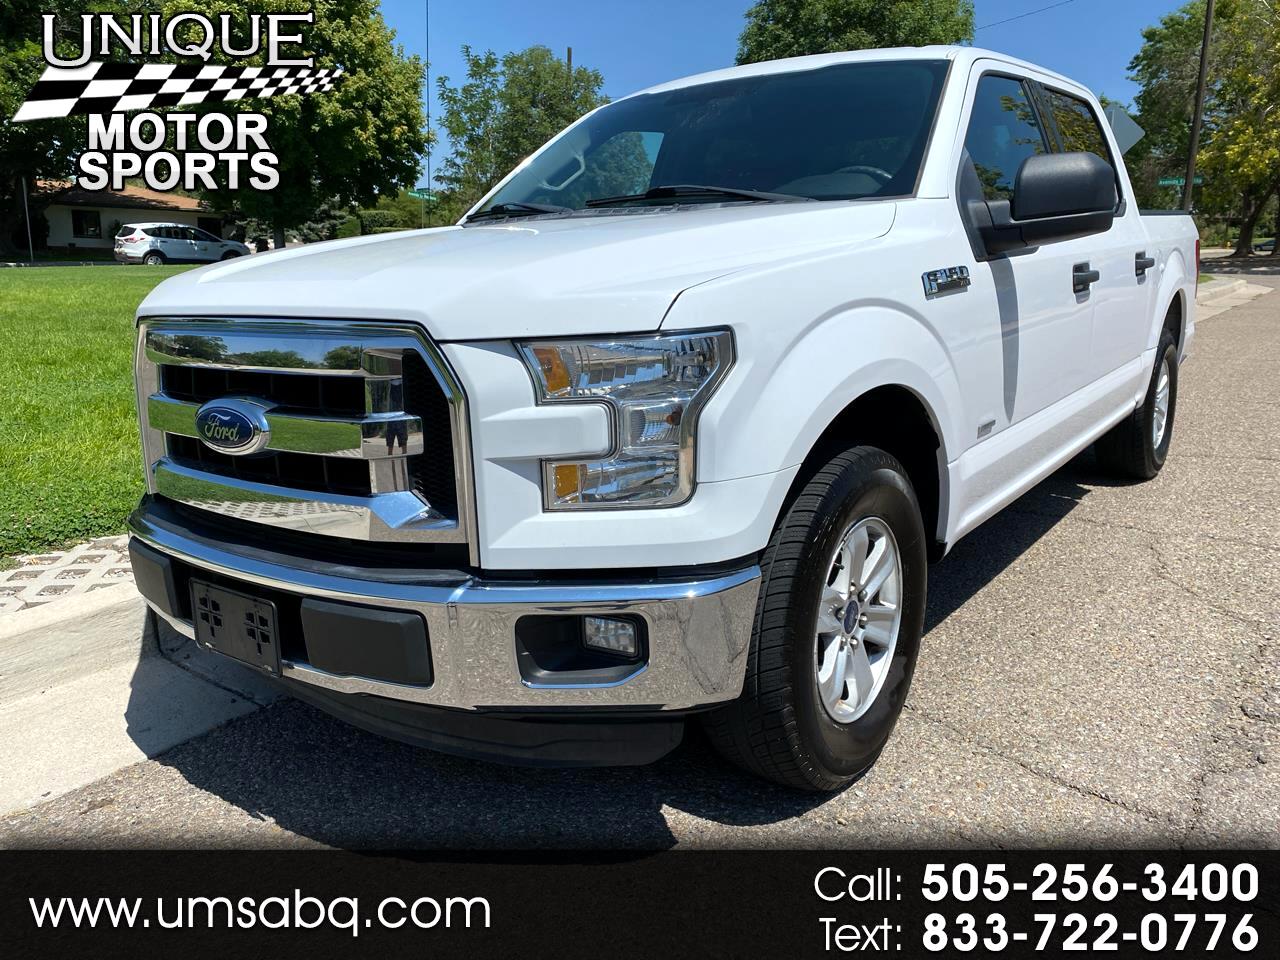 Used 2015 Ford F-150 XLT SuperCrew 5.5-ft. Bed 2WD for Sale in 2015 Ford F 150 Xlt 5.0 Towing Capacity